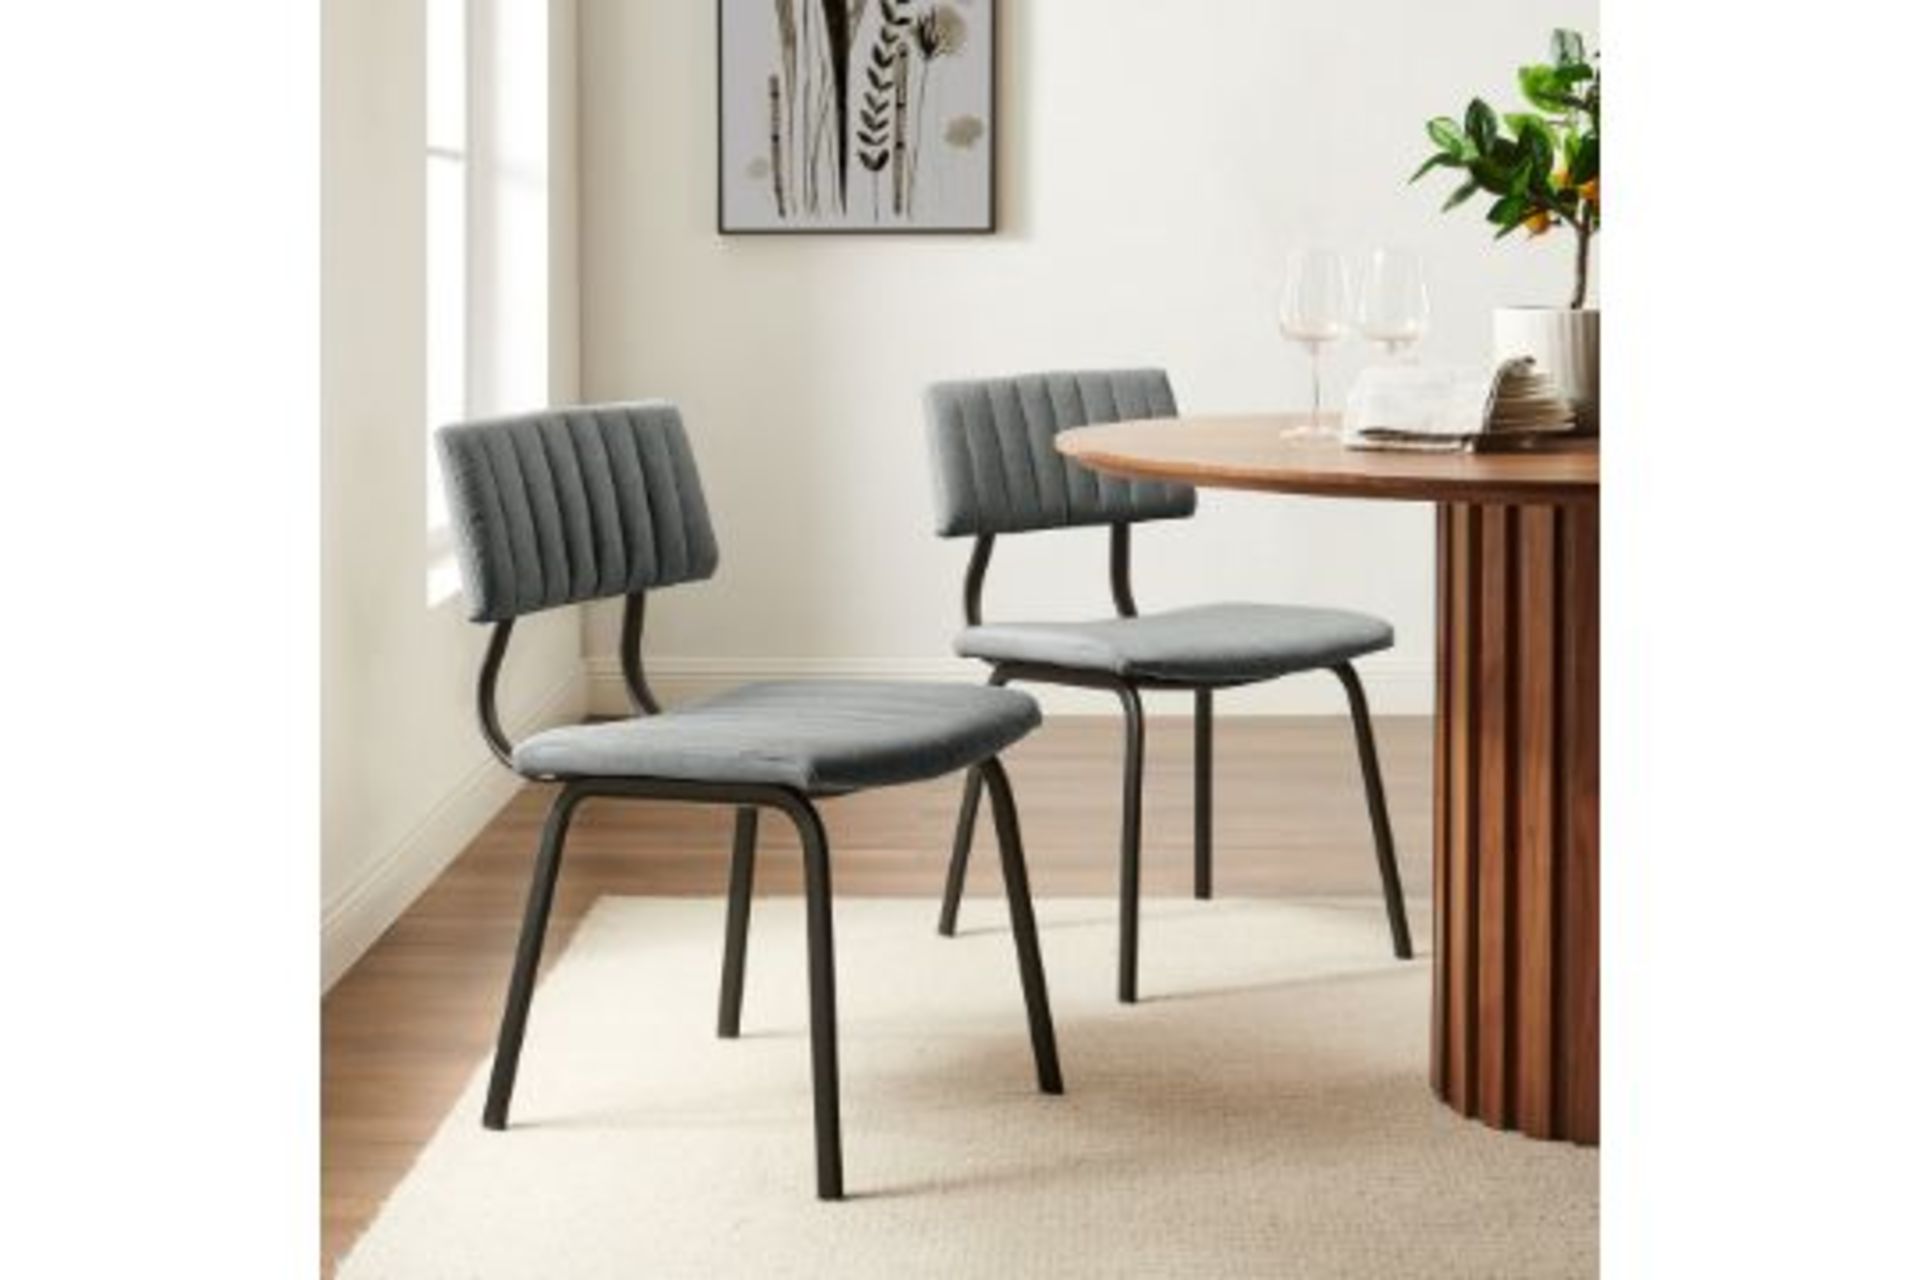 Charlecote Set of 2 Fluted Dining Chairs (Light Grey Linen) - RRP £199.99. R14.3. Our Charlecote